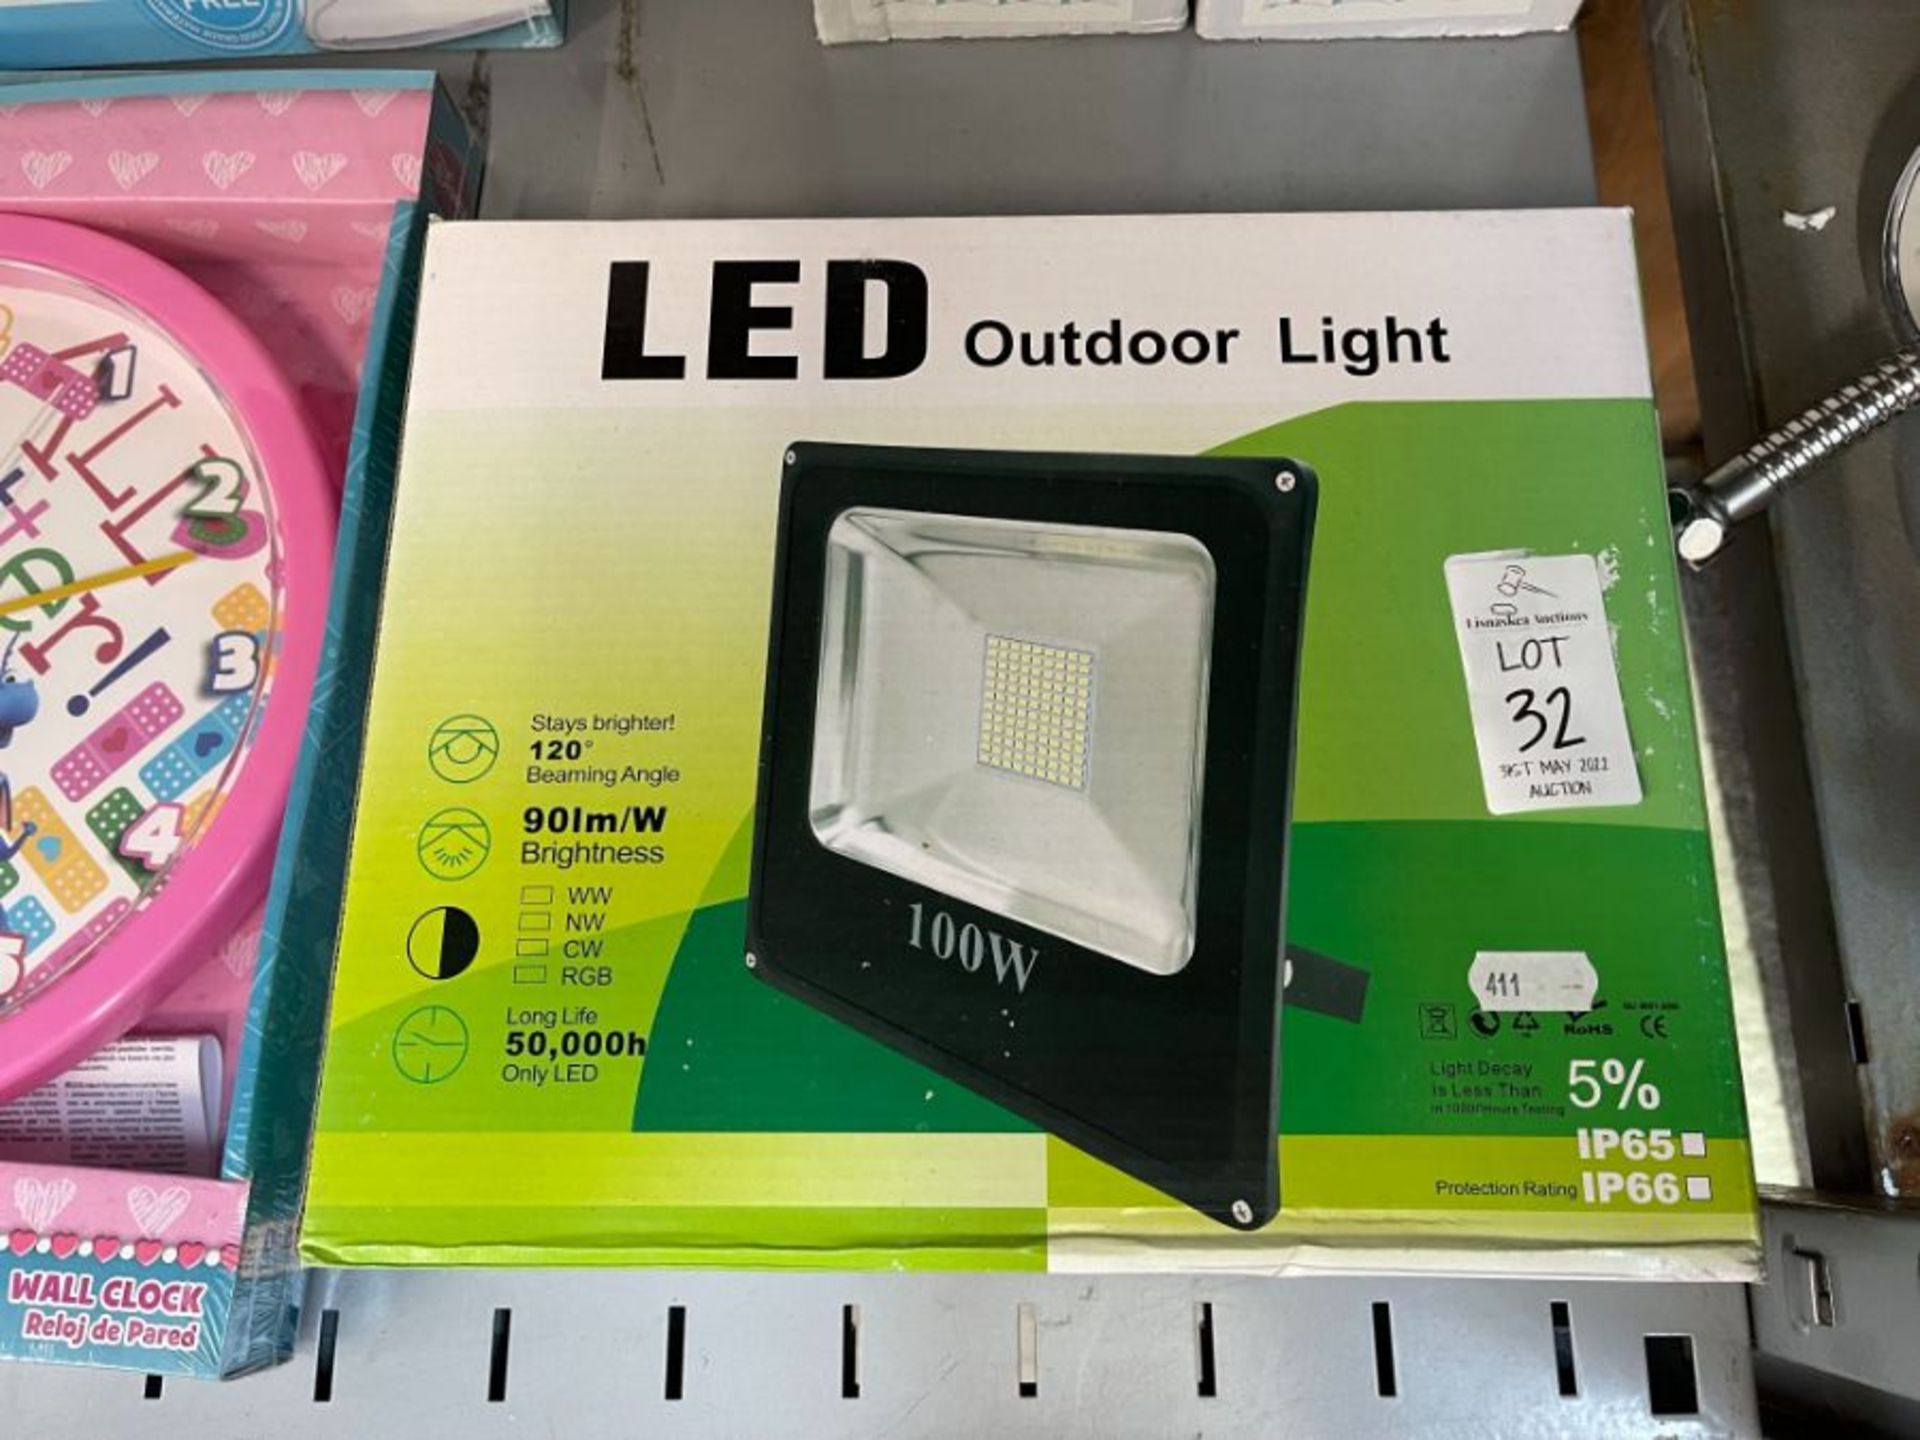 LED OUTDOOR LIGHT 100W (NEW)